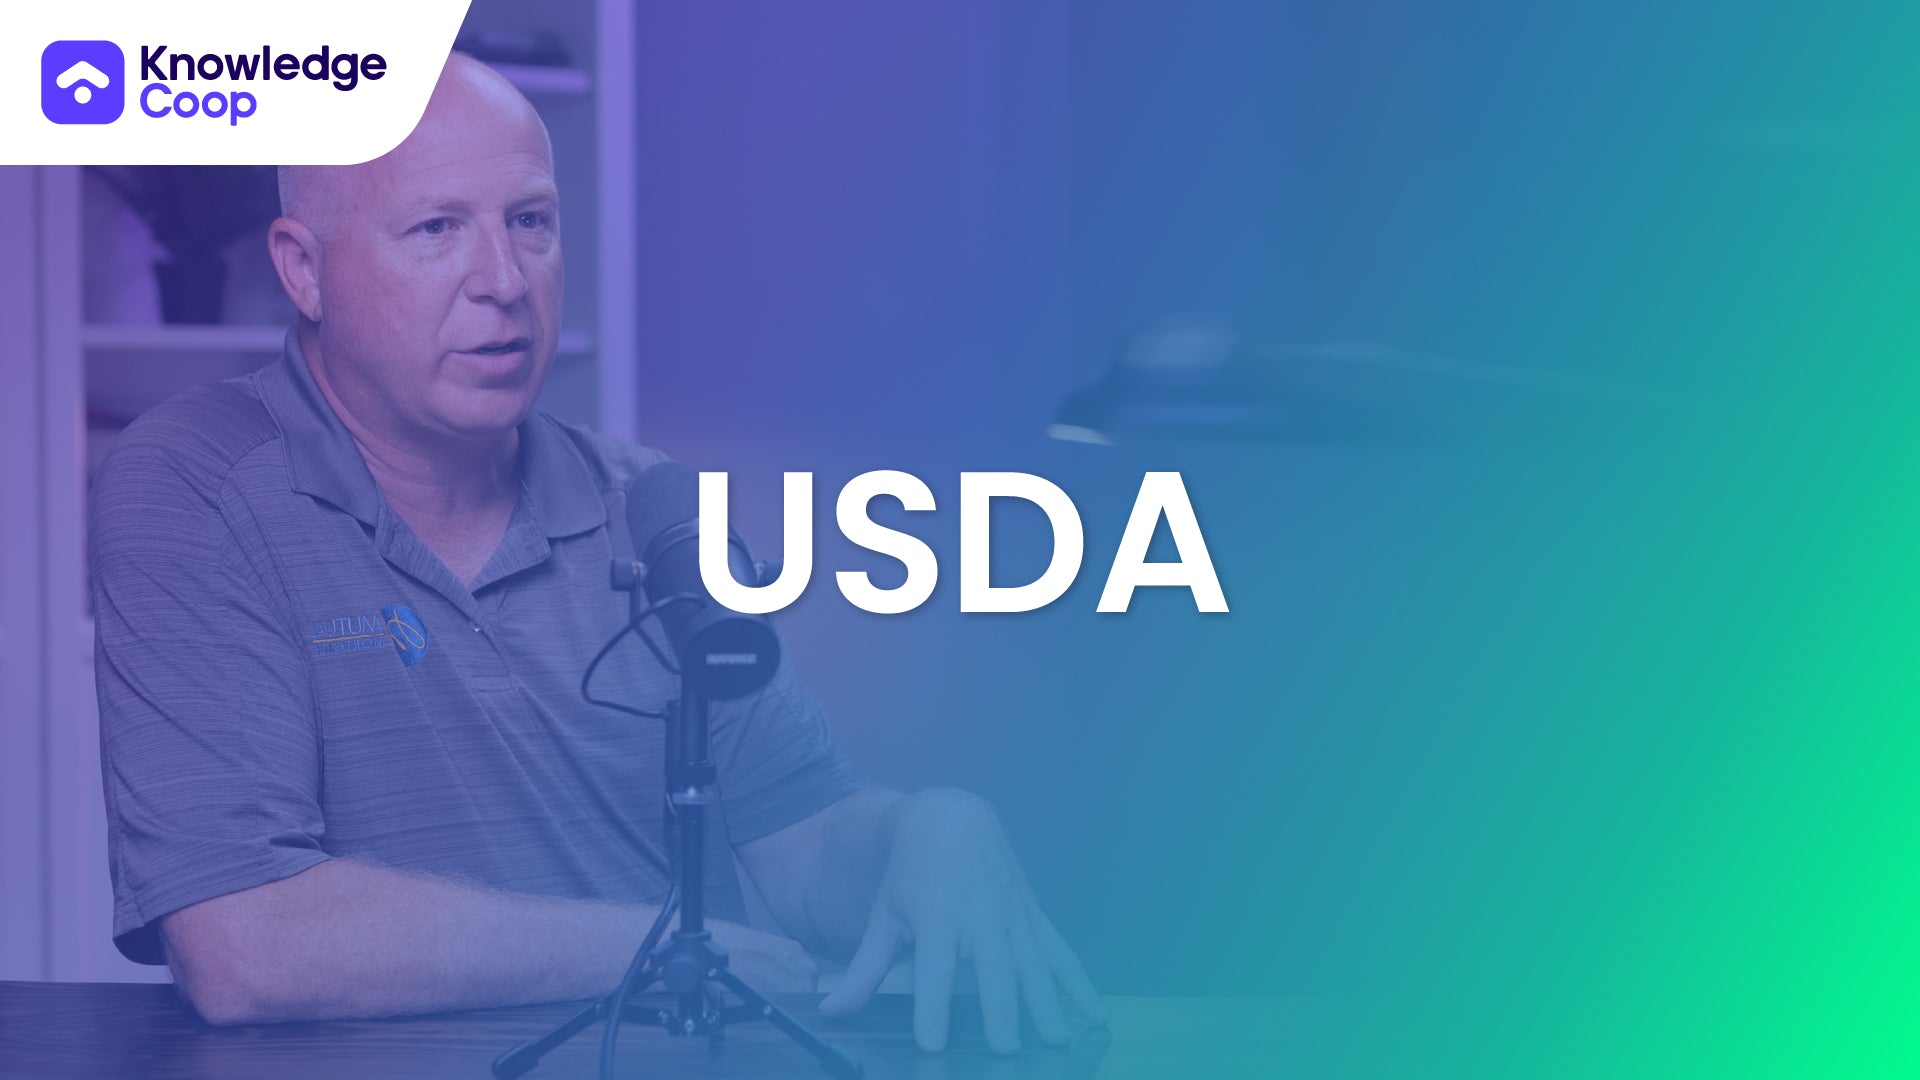 USDA - United States Department of Agriculture Loans